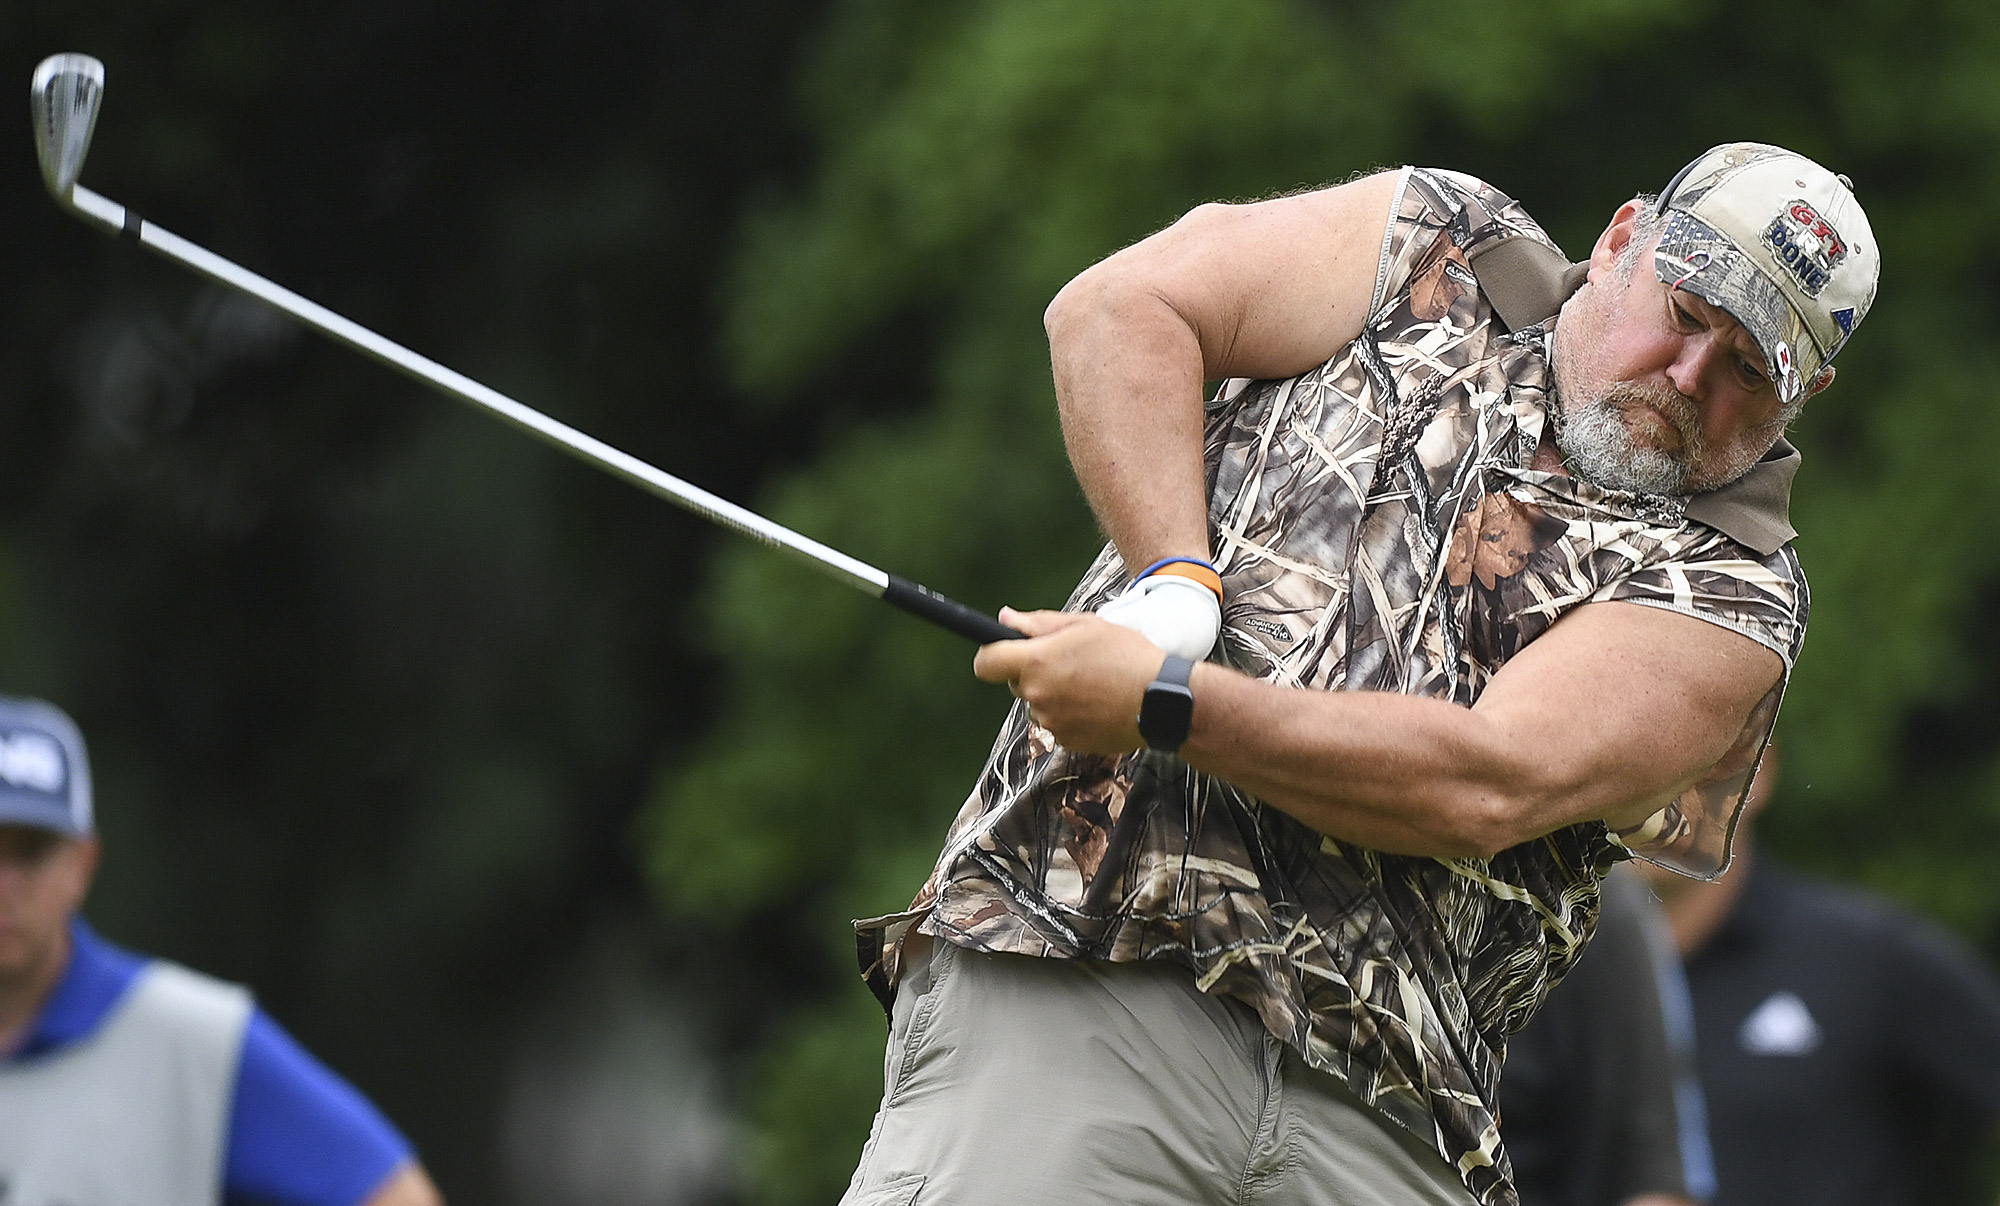 Photos: Celebrities at BMW Charity PRO AM golf in Upstate South Carolina